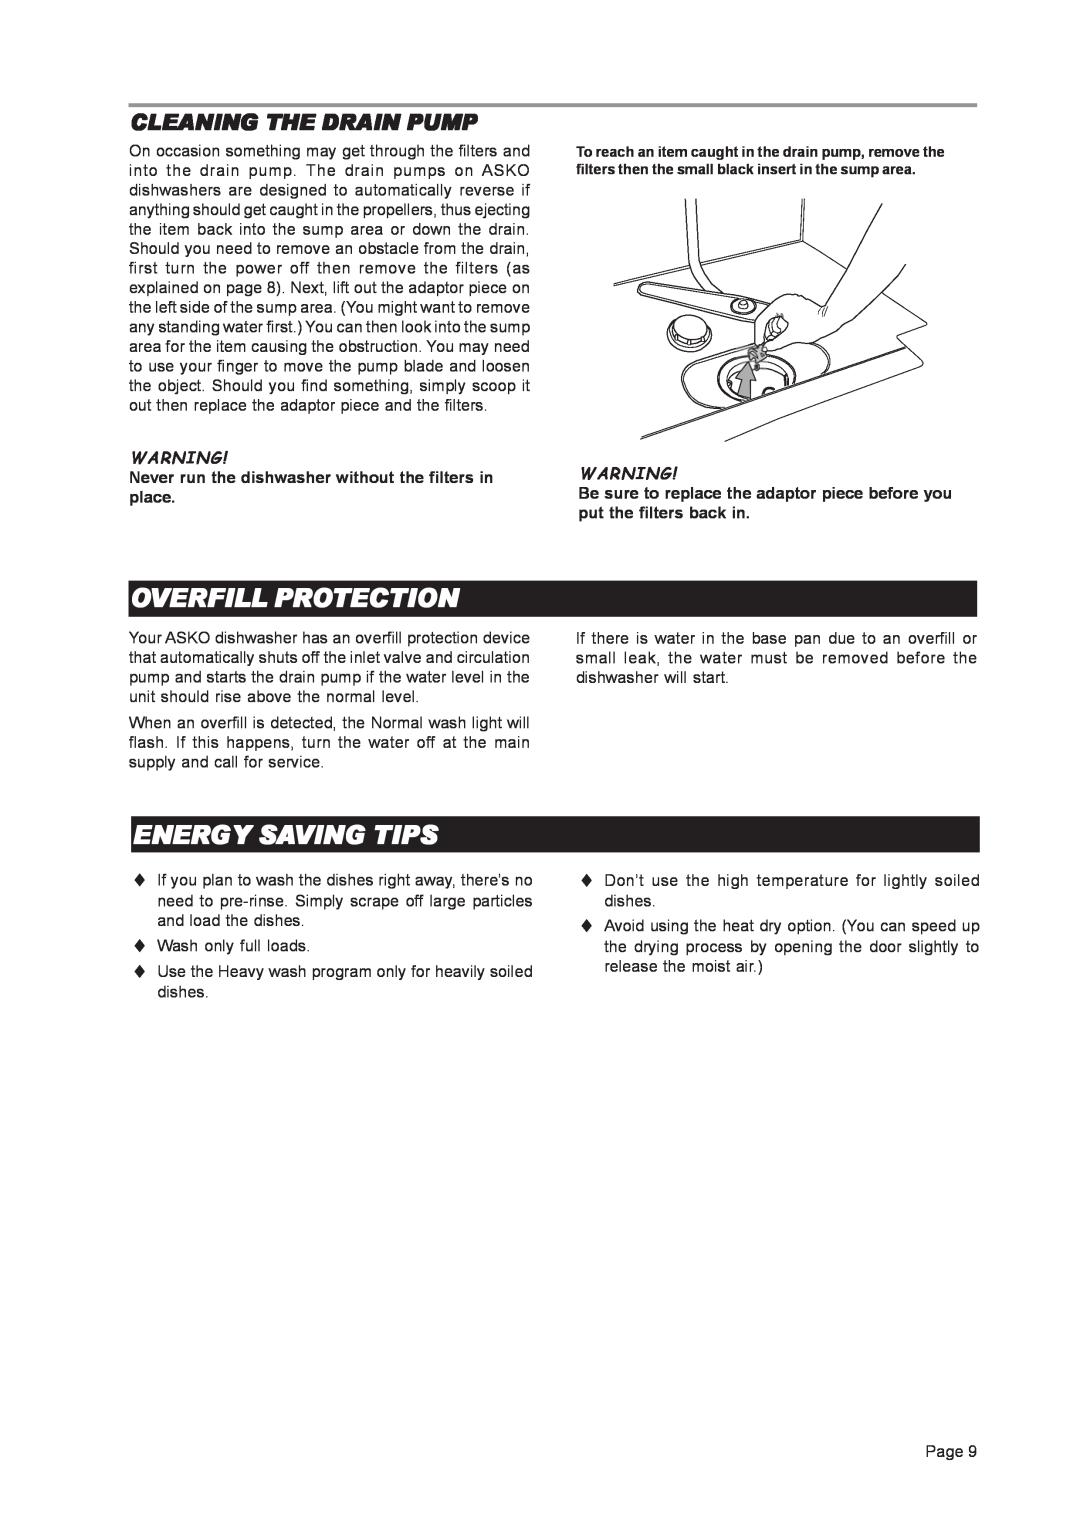 Asko D3121 important safety instructions Overfill Protection, Energy Saving Tips, Cleaning The Drain Pump 